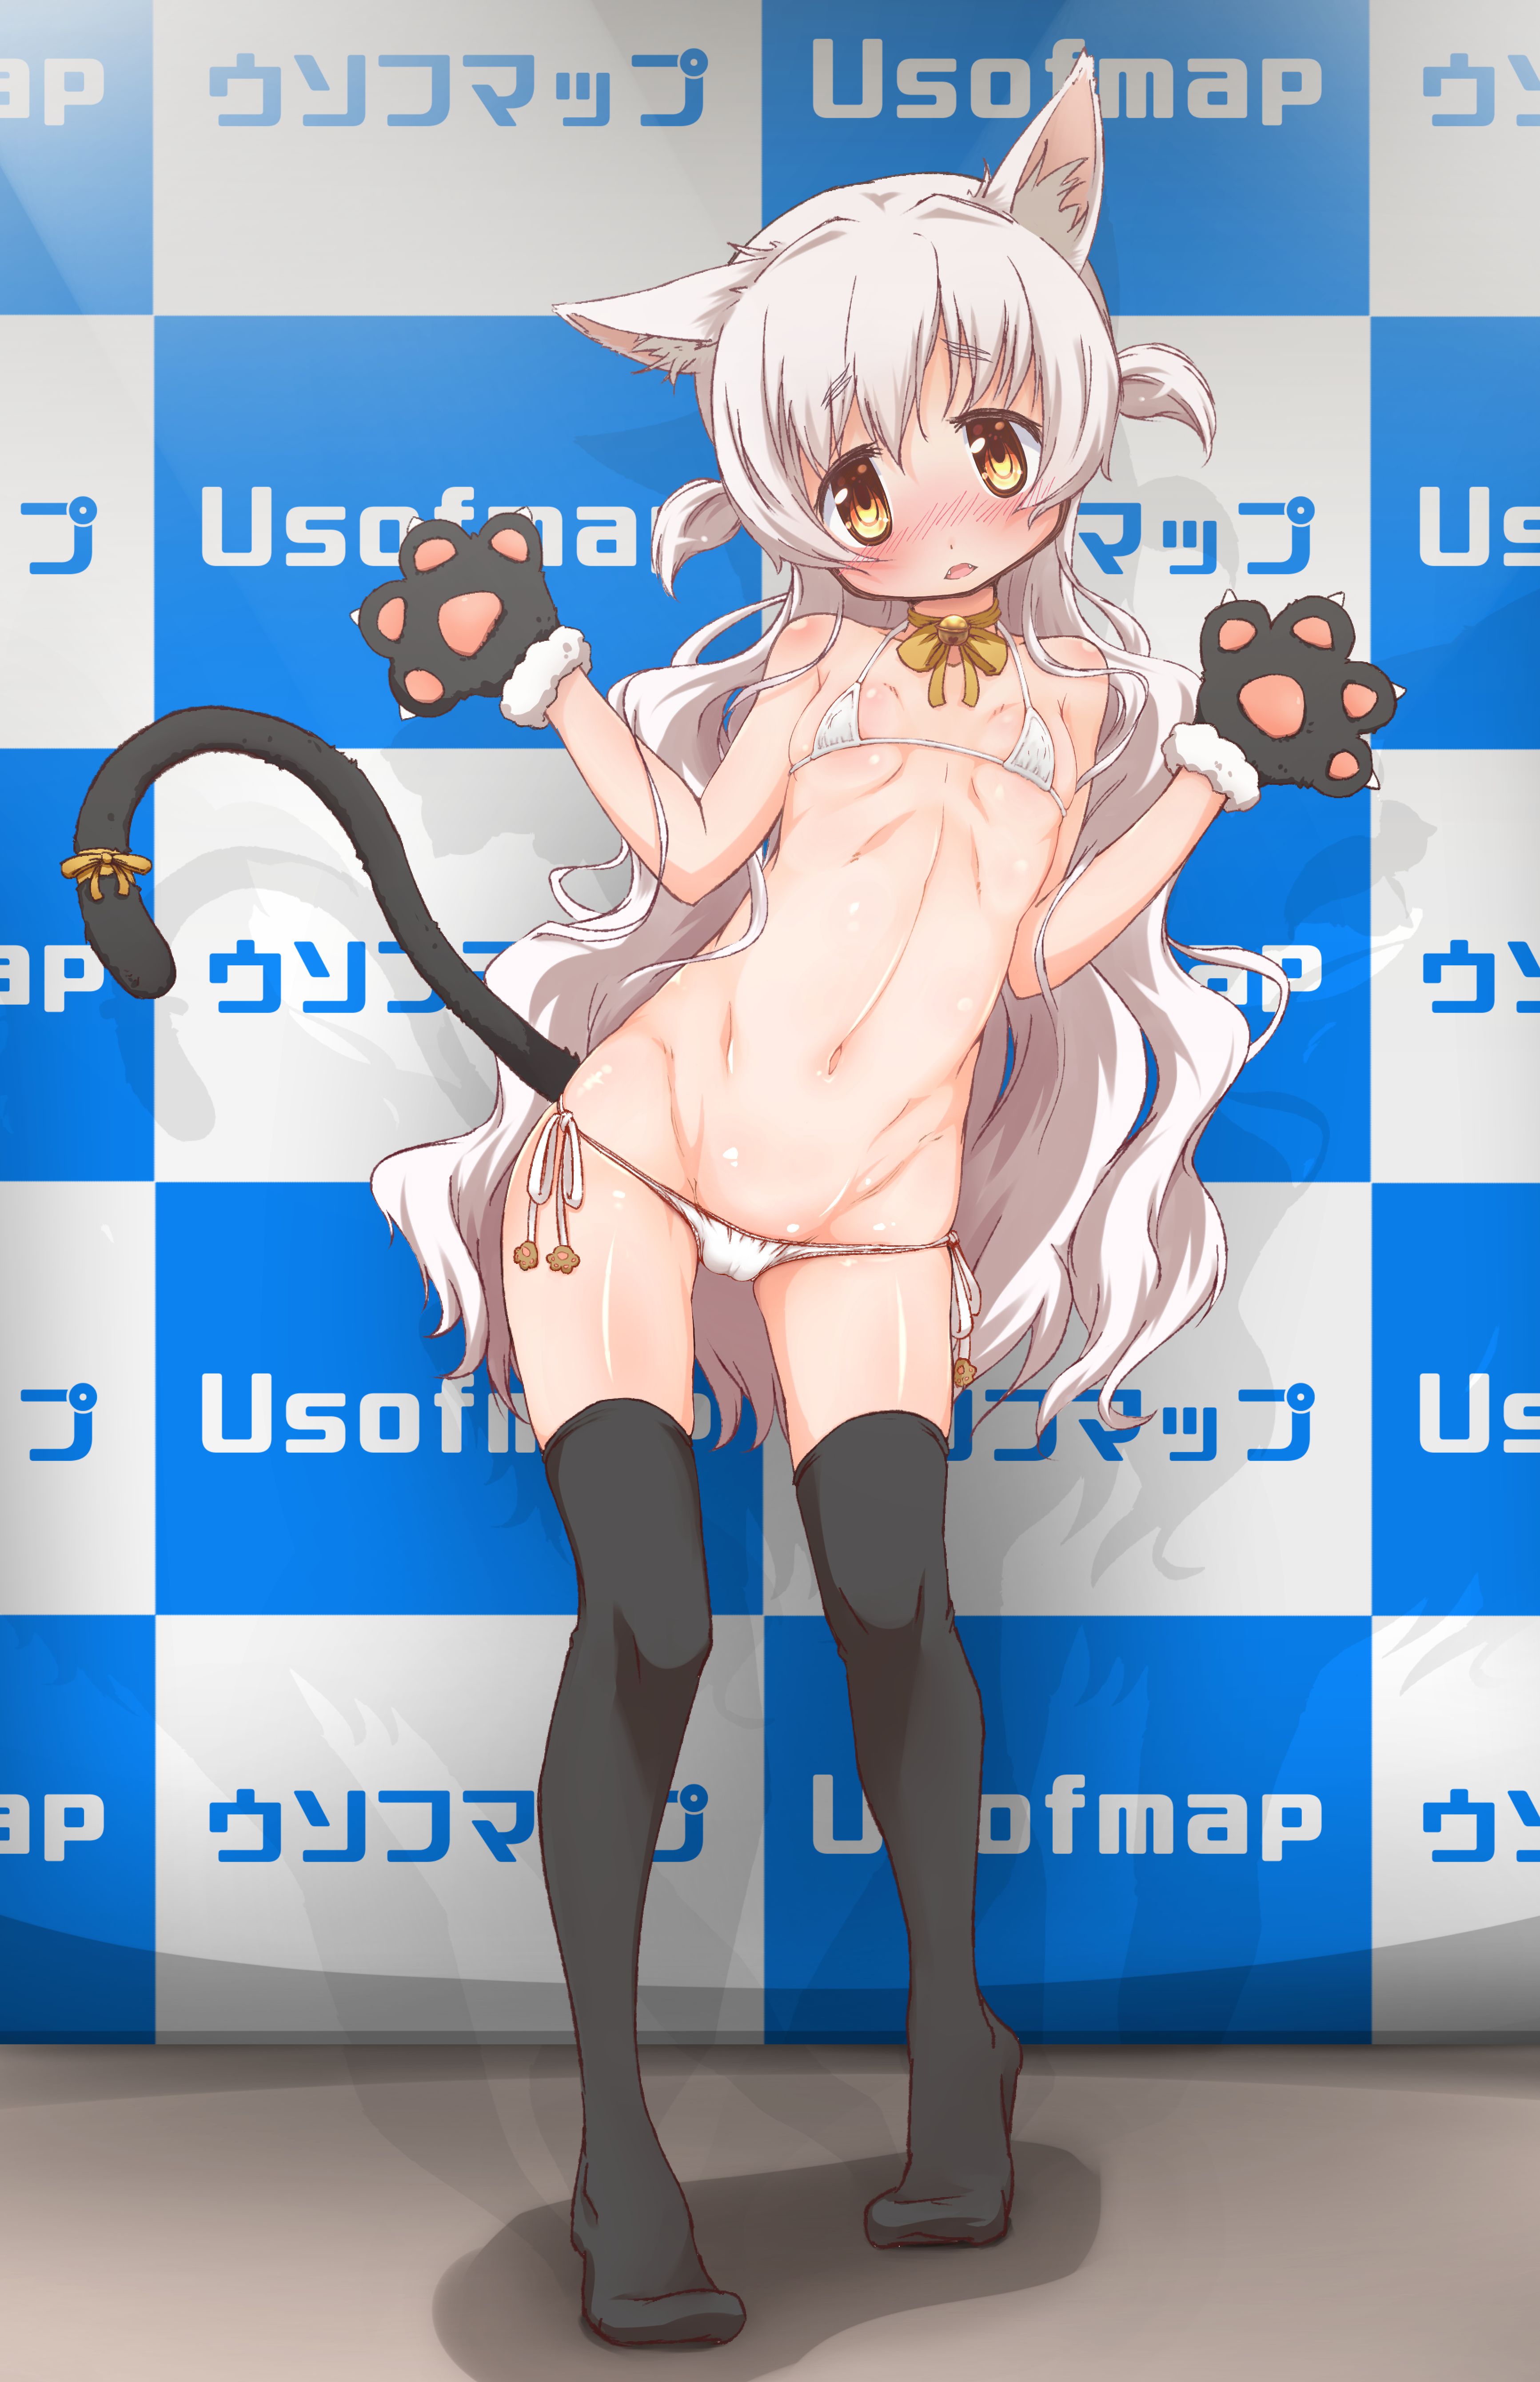 [Exposure mono loli] erotic image of lori girl who has become a exposed person in the interview &amp; photo session in front of the sofmap-like wall of the example! 32